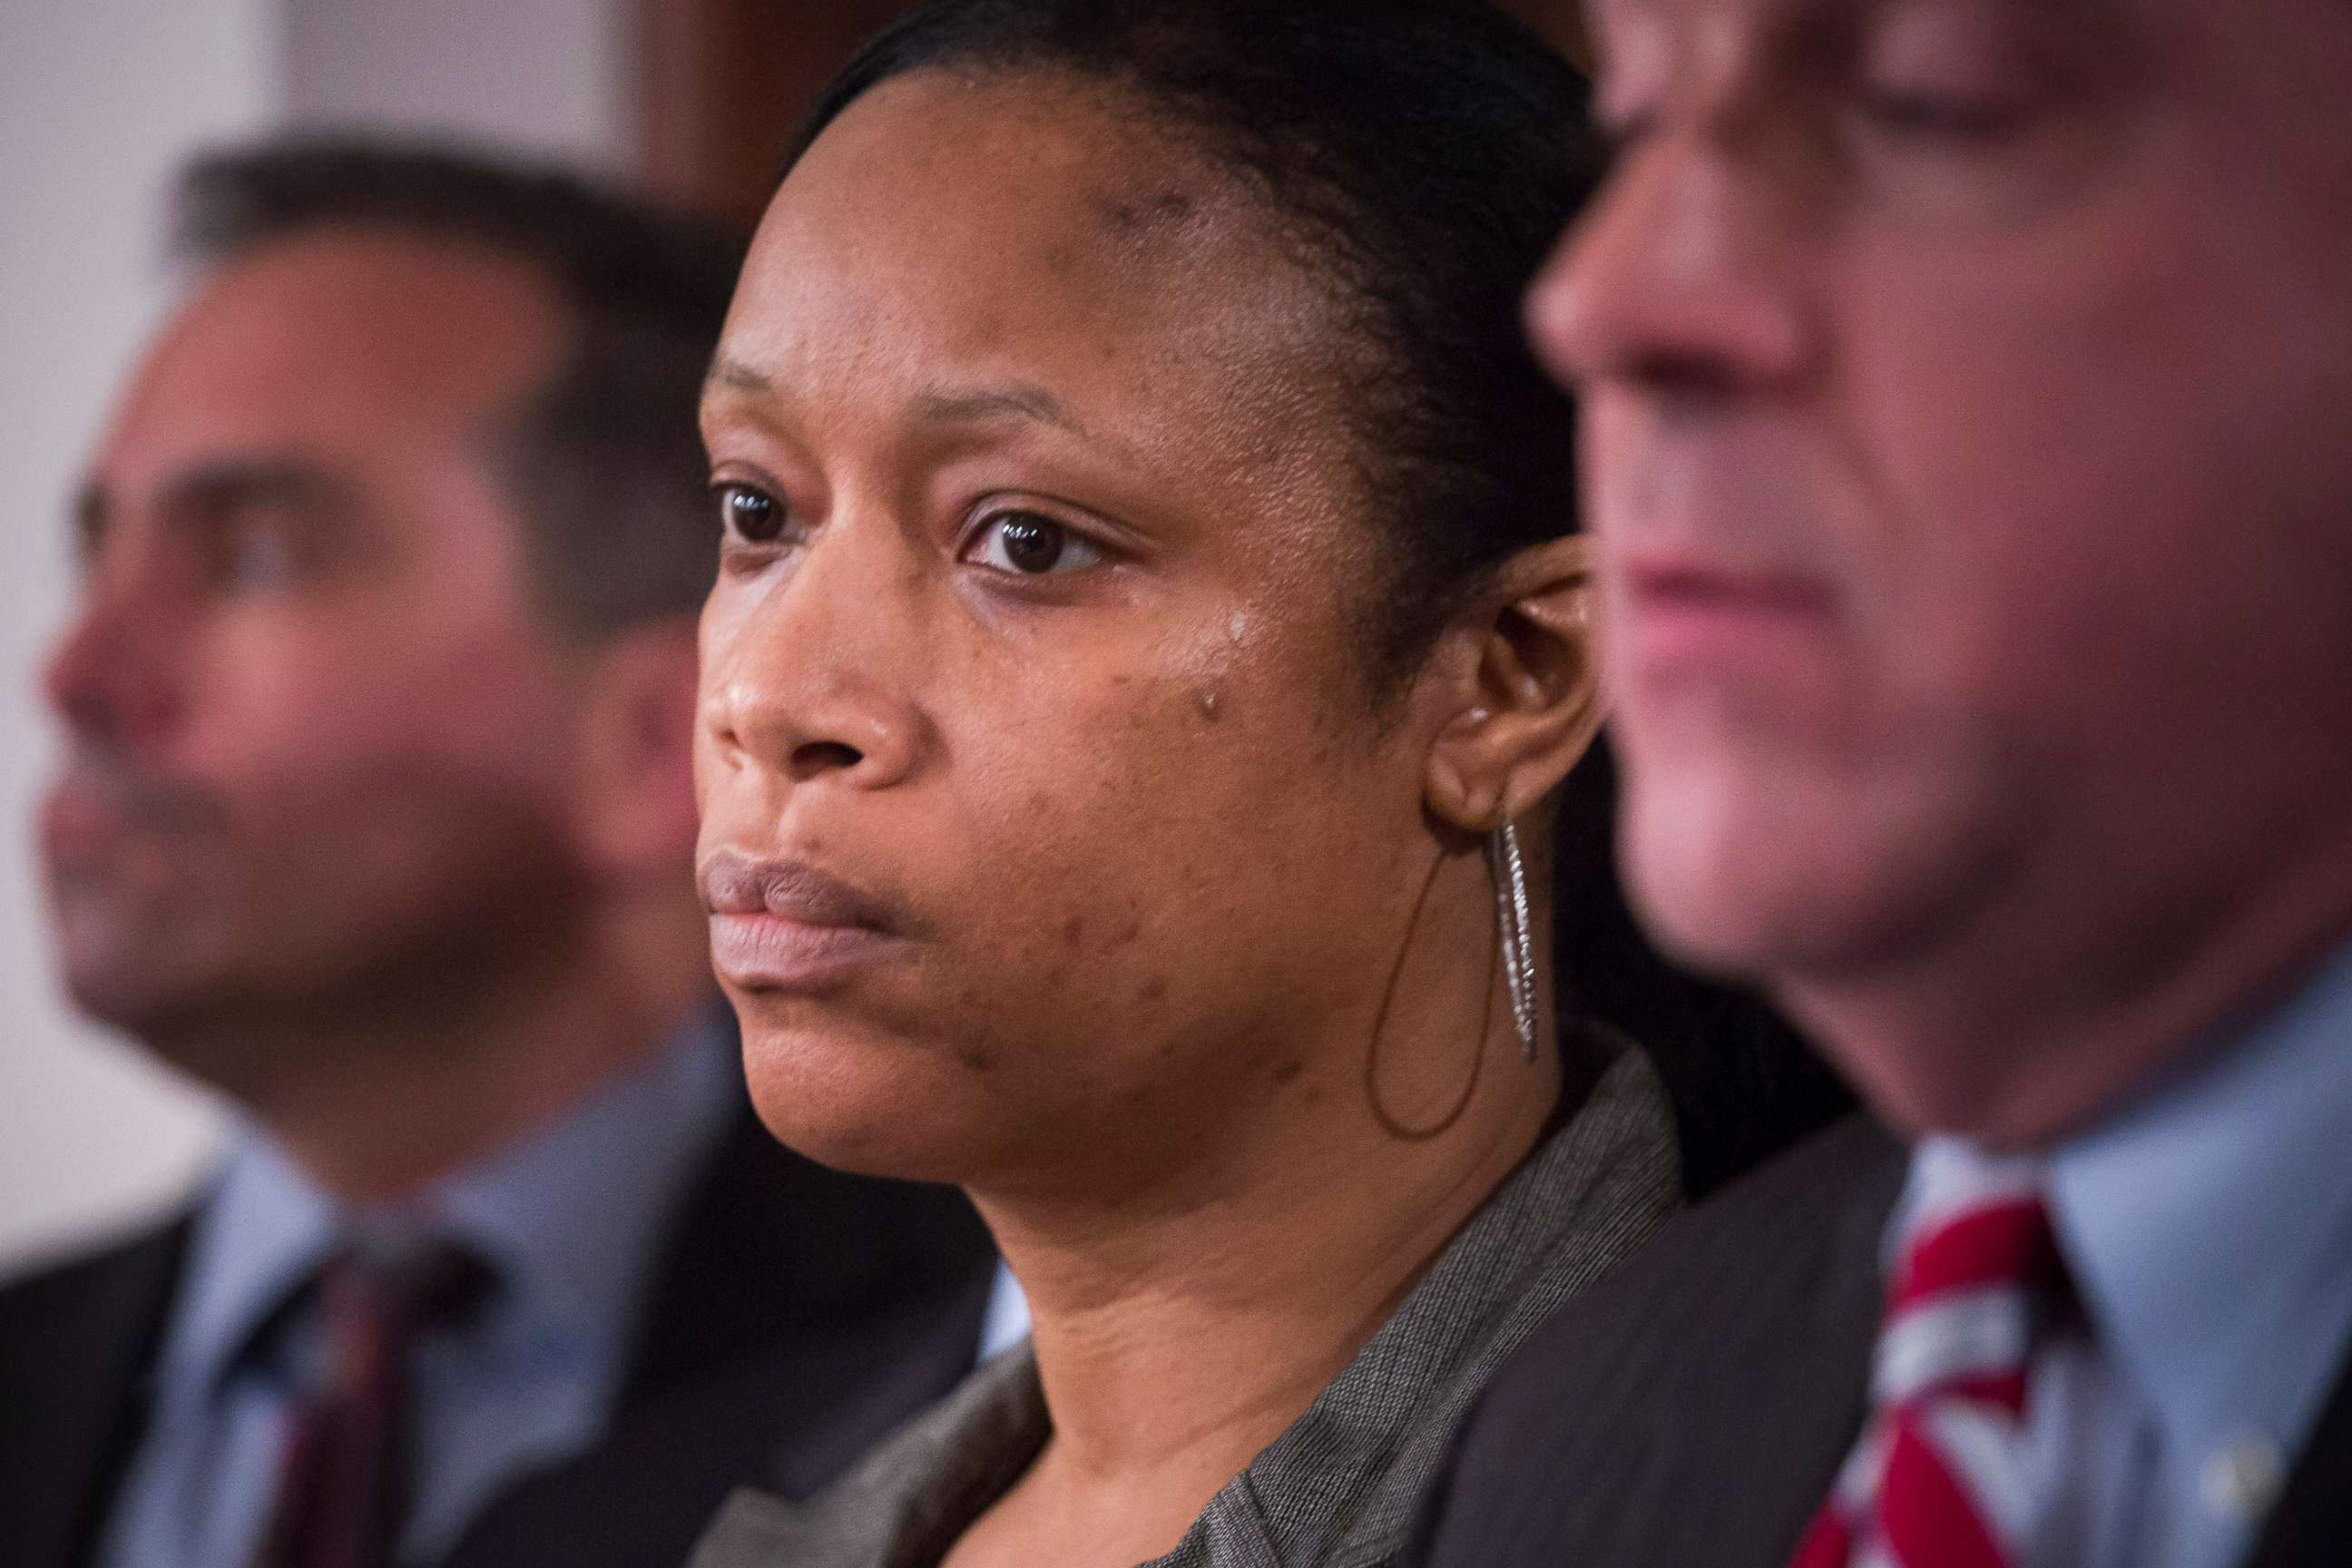 PHOTO: Sgt. Kizzy Adonis of the New York Police Department, at a news conference regarding internal disciplinary charges over her role in the 2014 death of Eric Garner, in New York, Jan. 8, 2016.